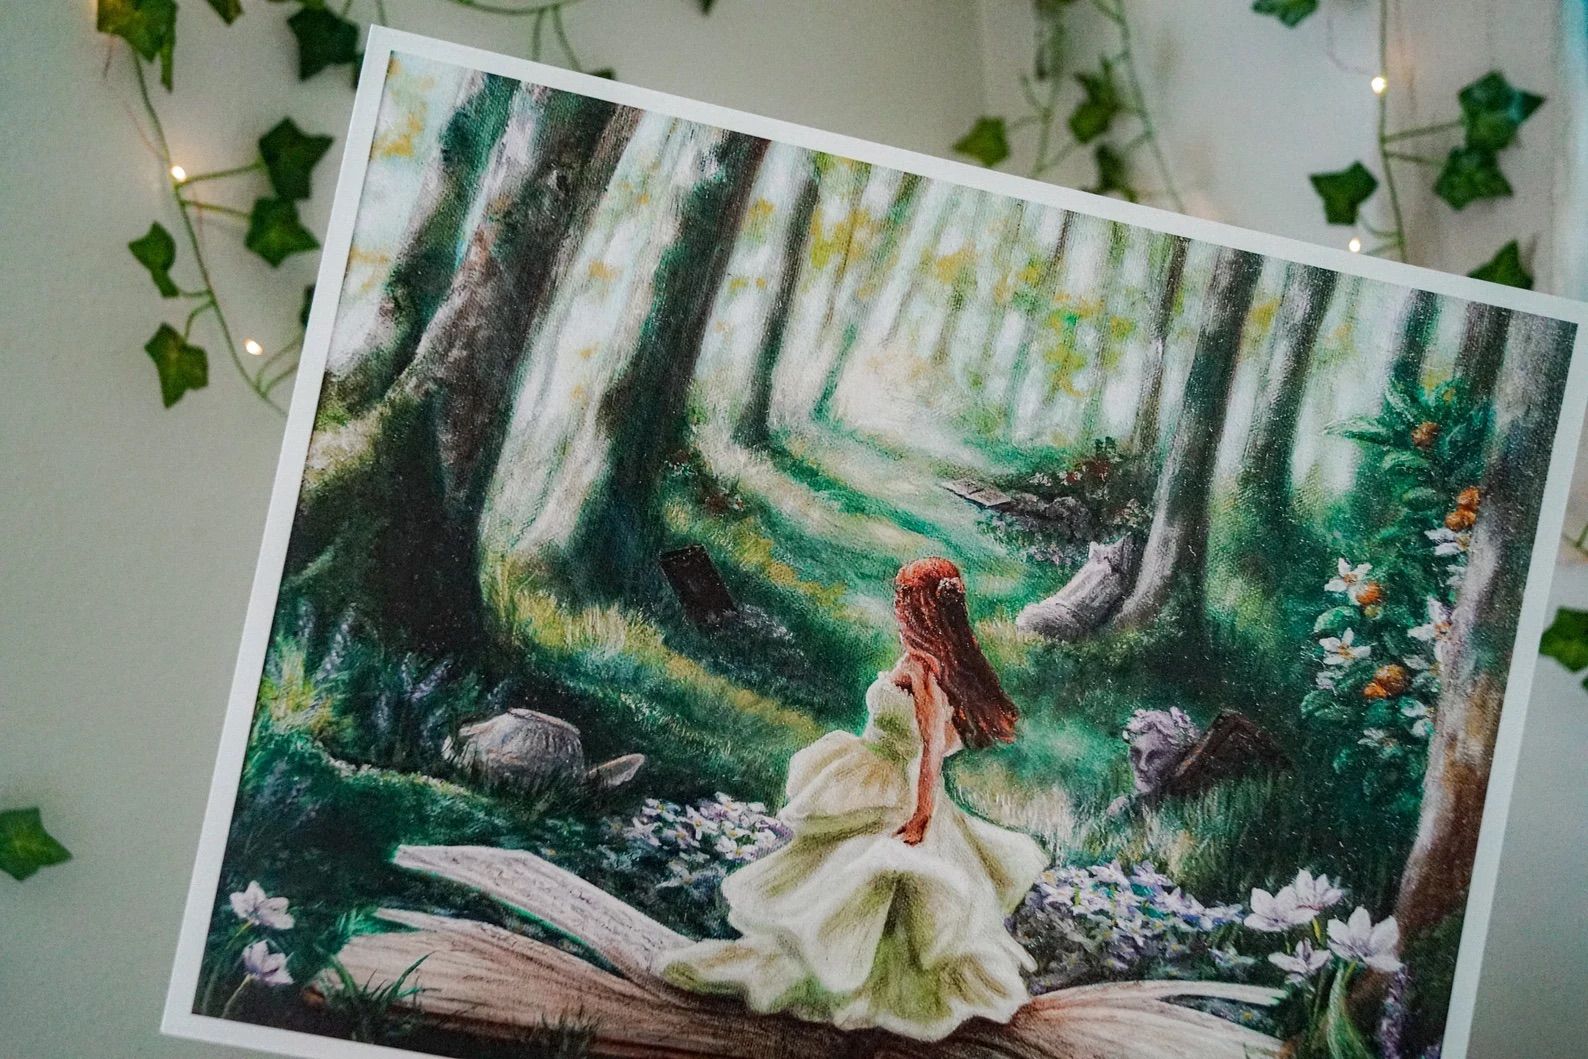 11x14 inch oil painting of a white girl in a white dress standing on an open book in the woods is in front of a wall with lights and vines.